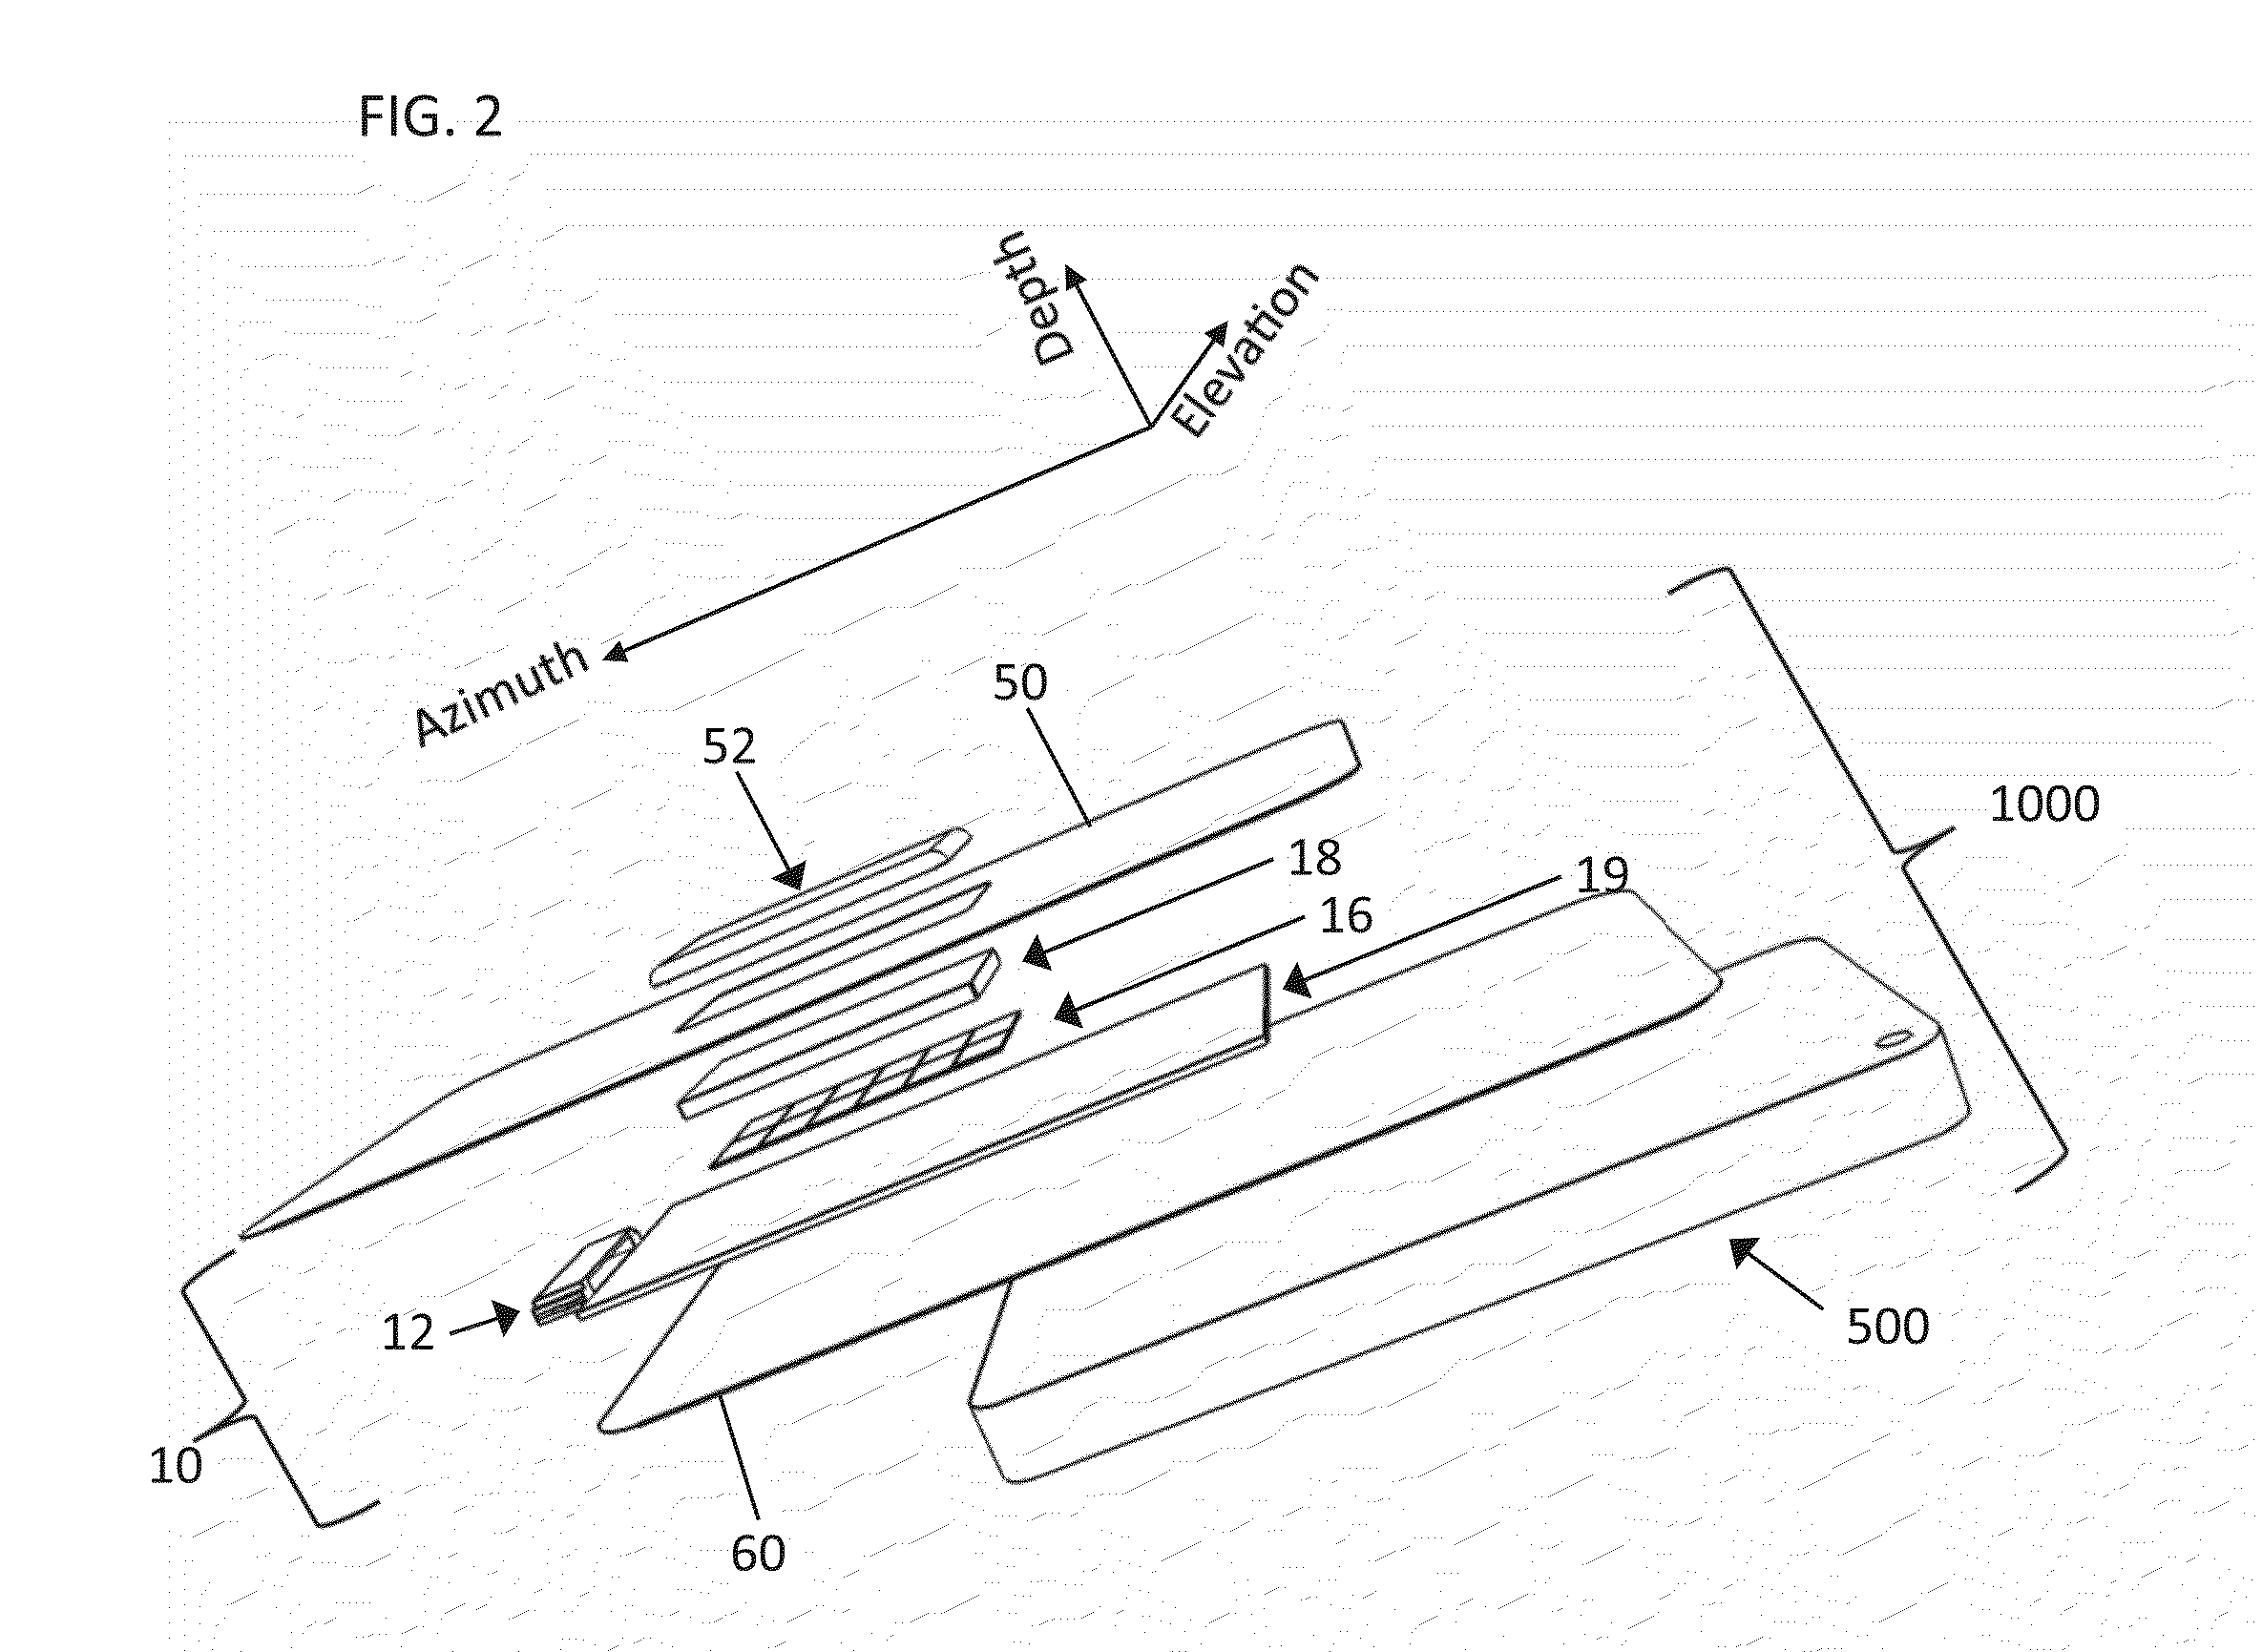 Portable Ultrasound System Comprising Ultrasound Front-End Directly Connected to a Mobile Device